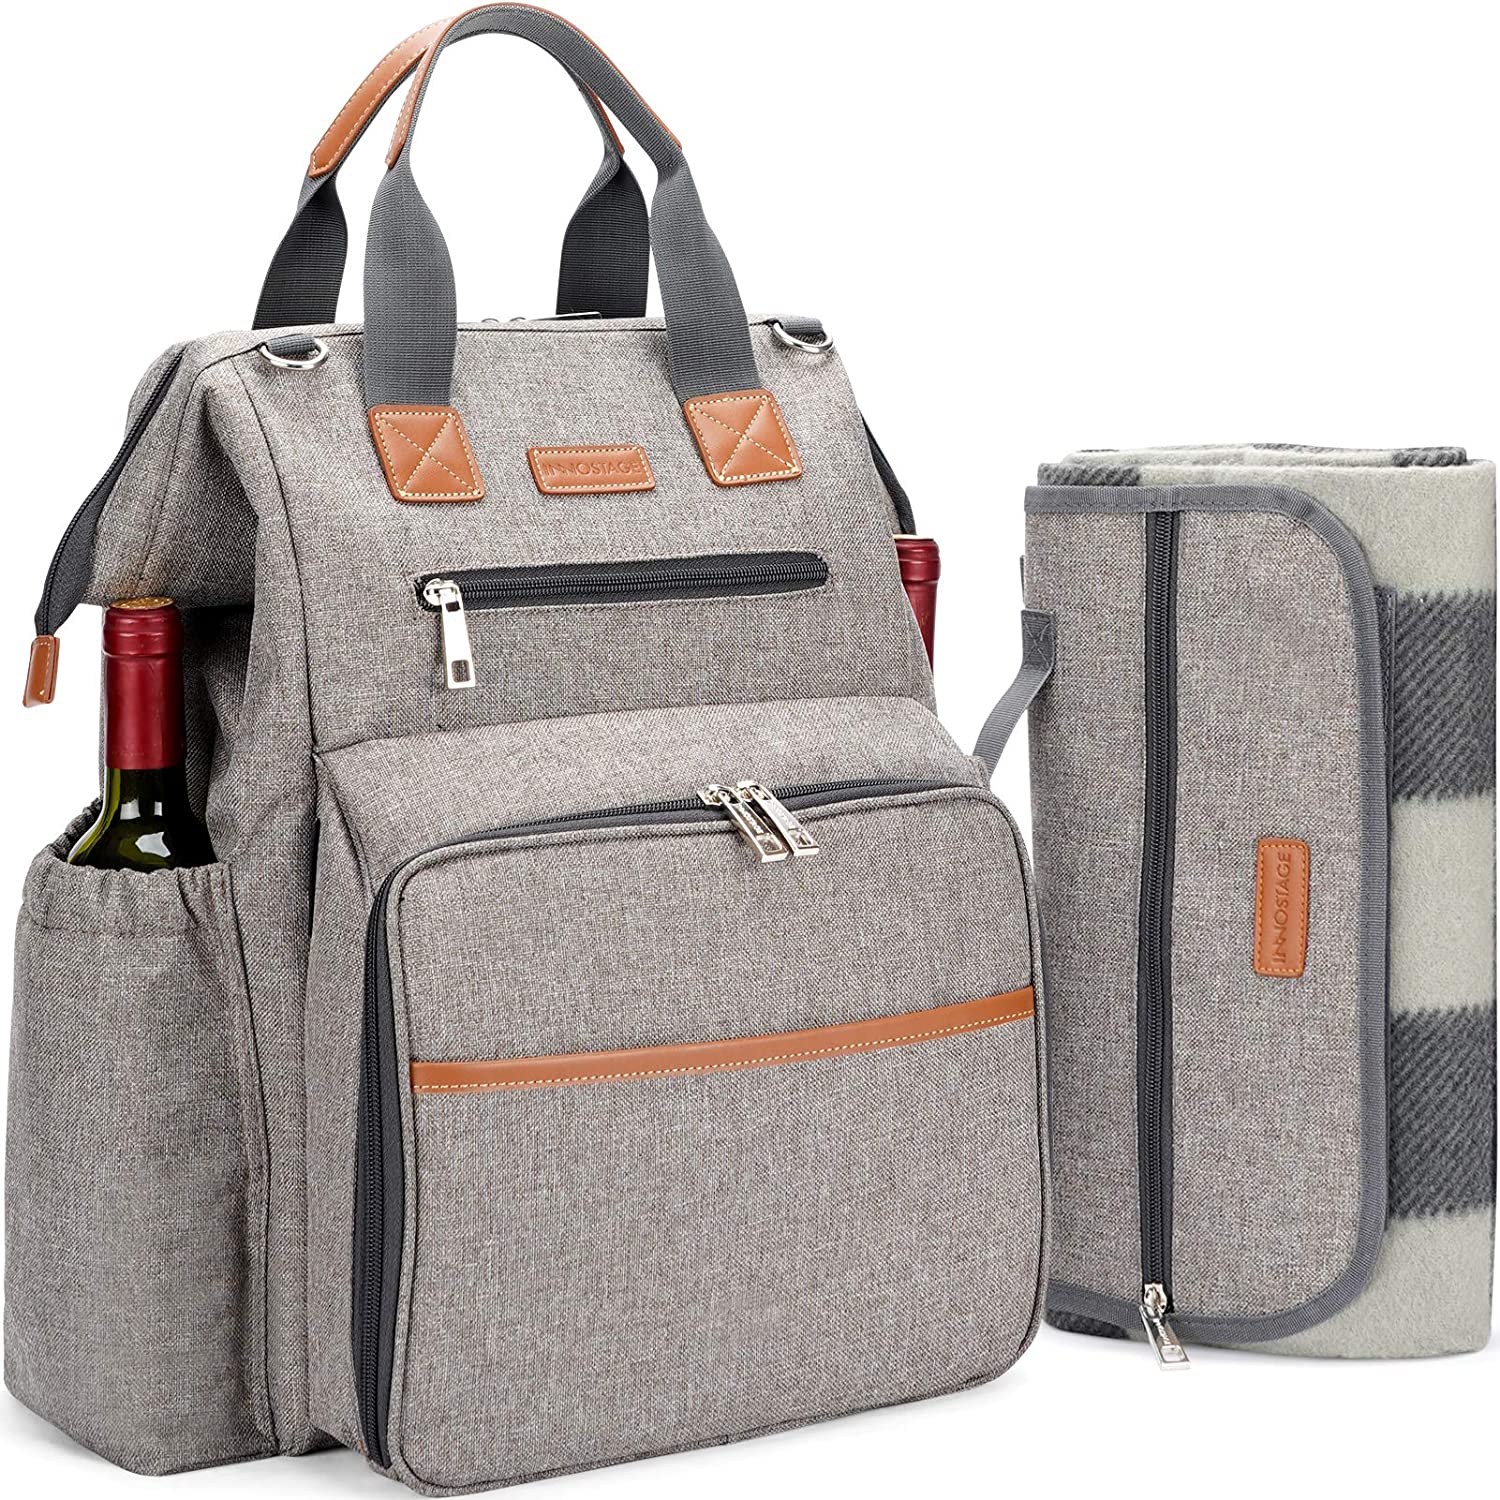 HappyPicnic - Picnic Backpack for 4 Person